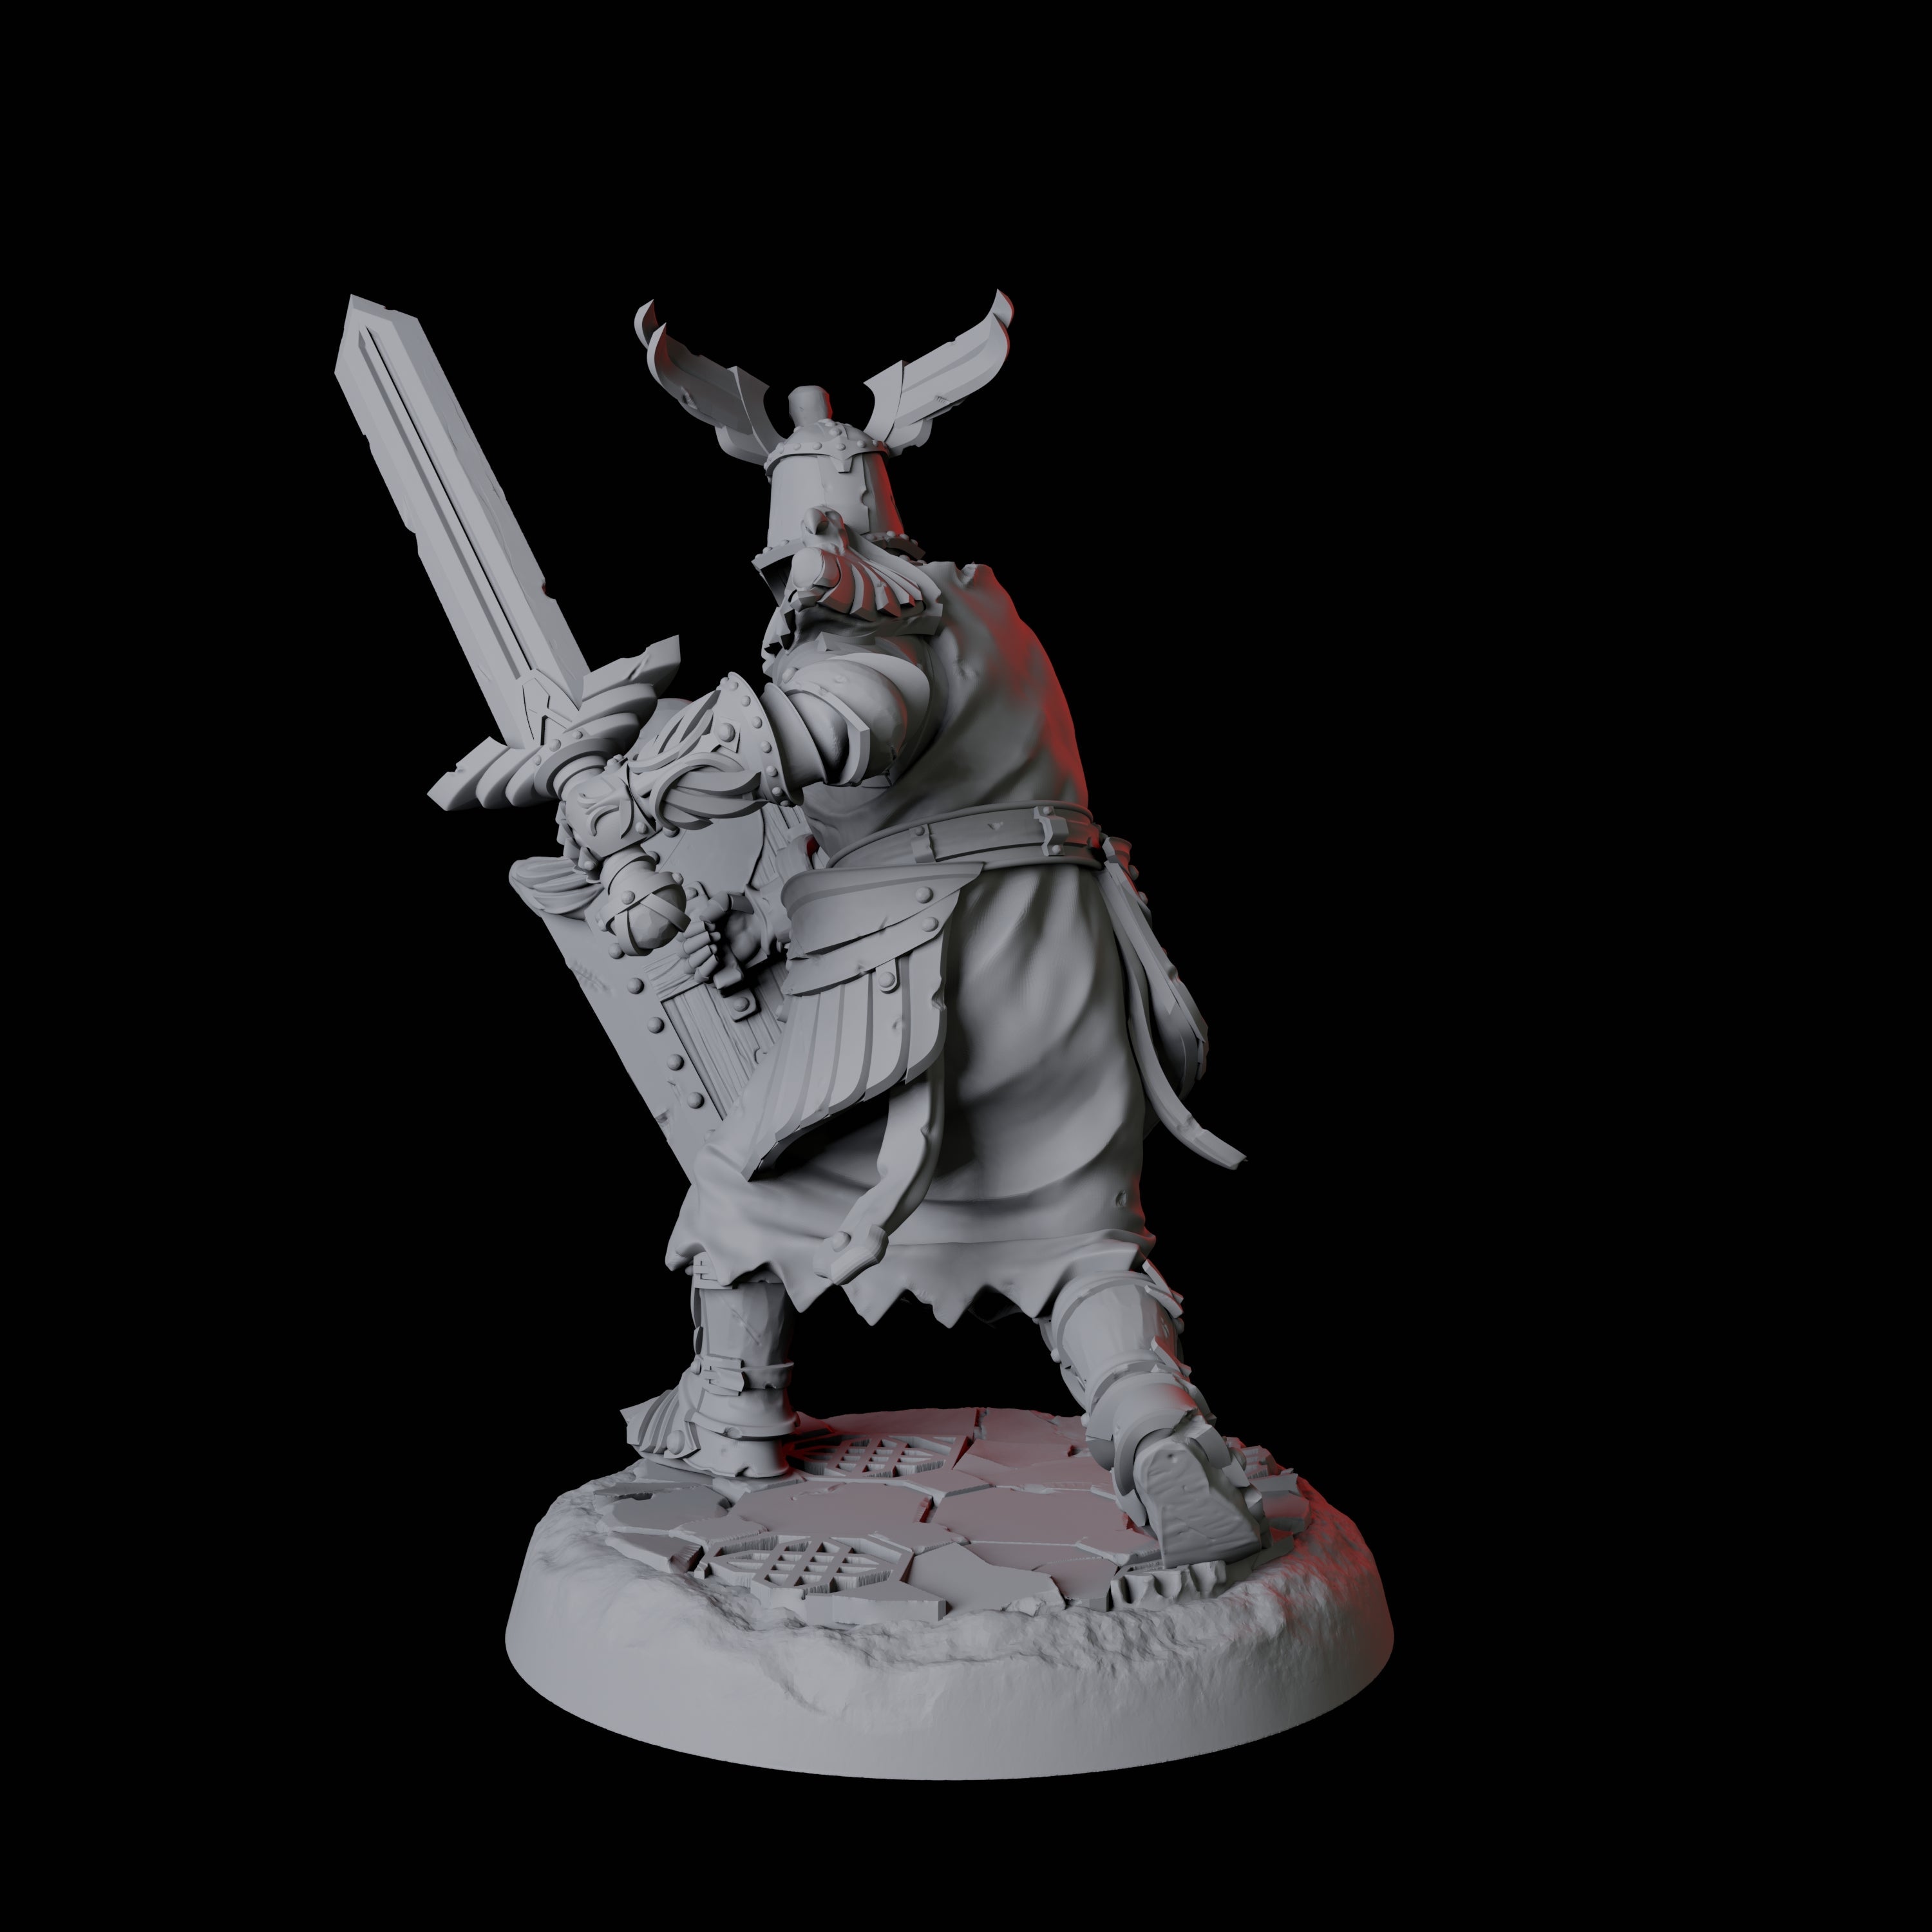 Holy Inquisitor Paladin Miniature for Dungeons and Dragons, Pathfinder or other TTRPGs